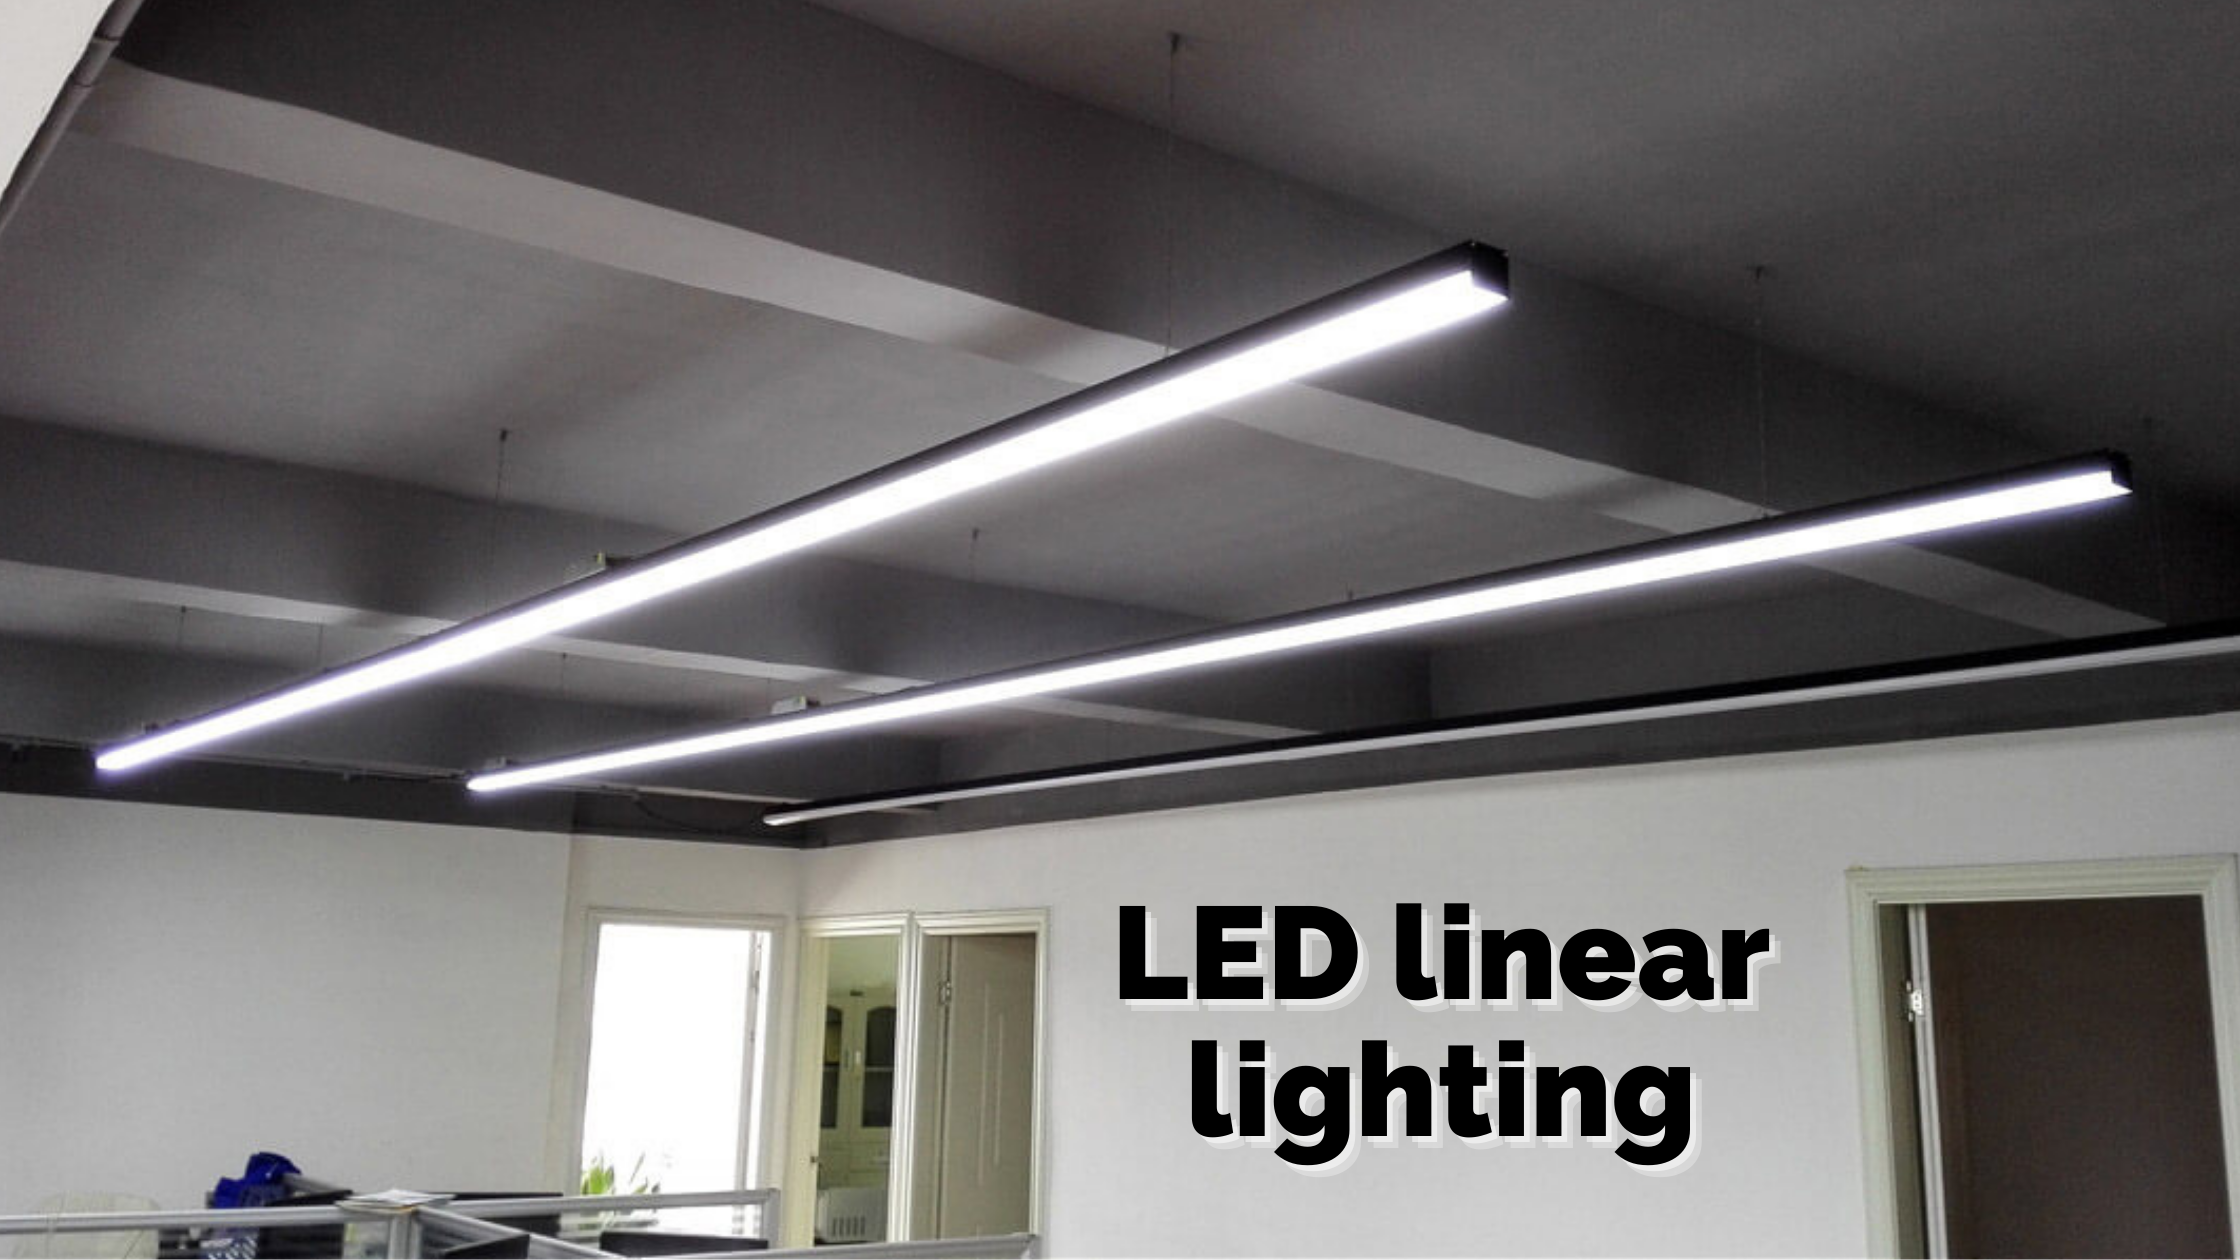 What is LED linear lighting?